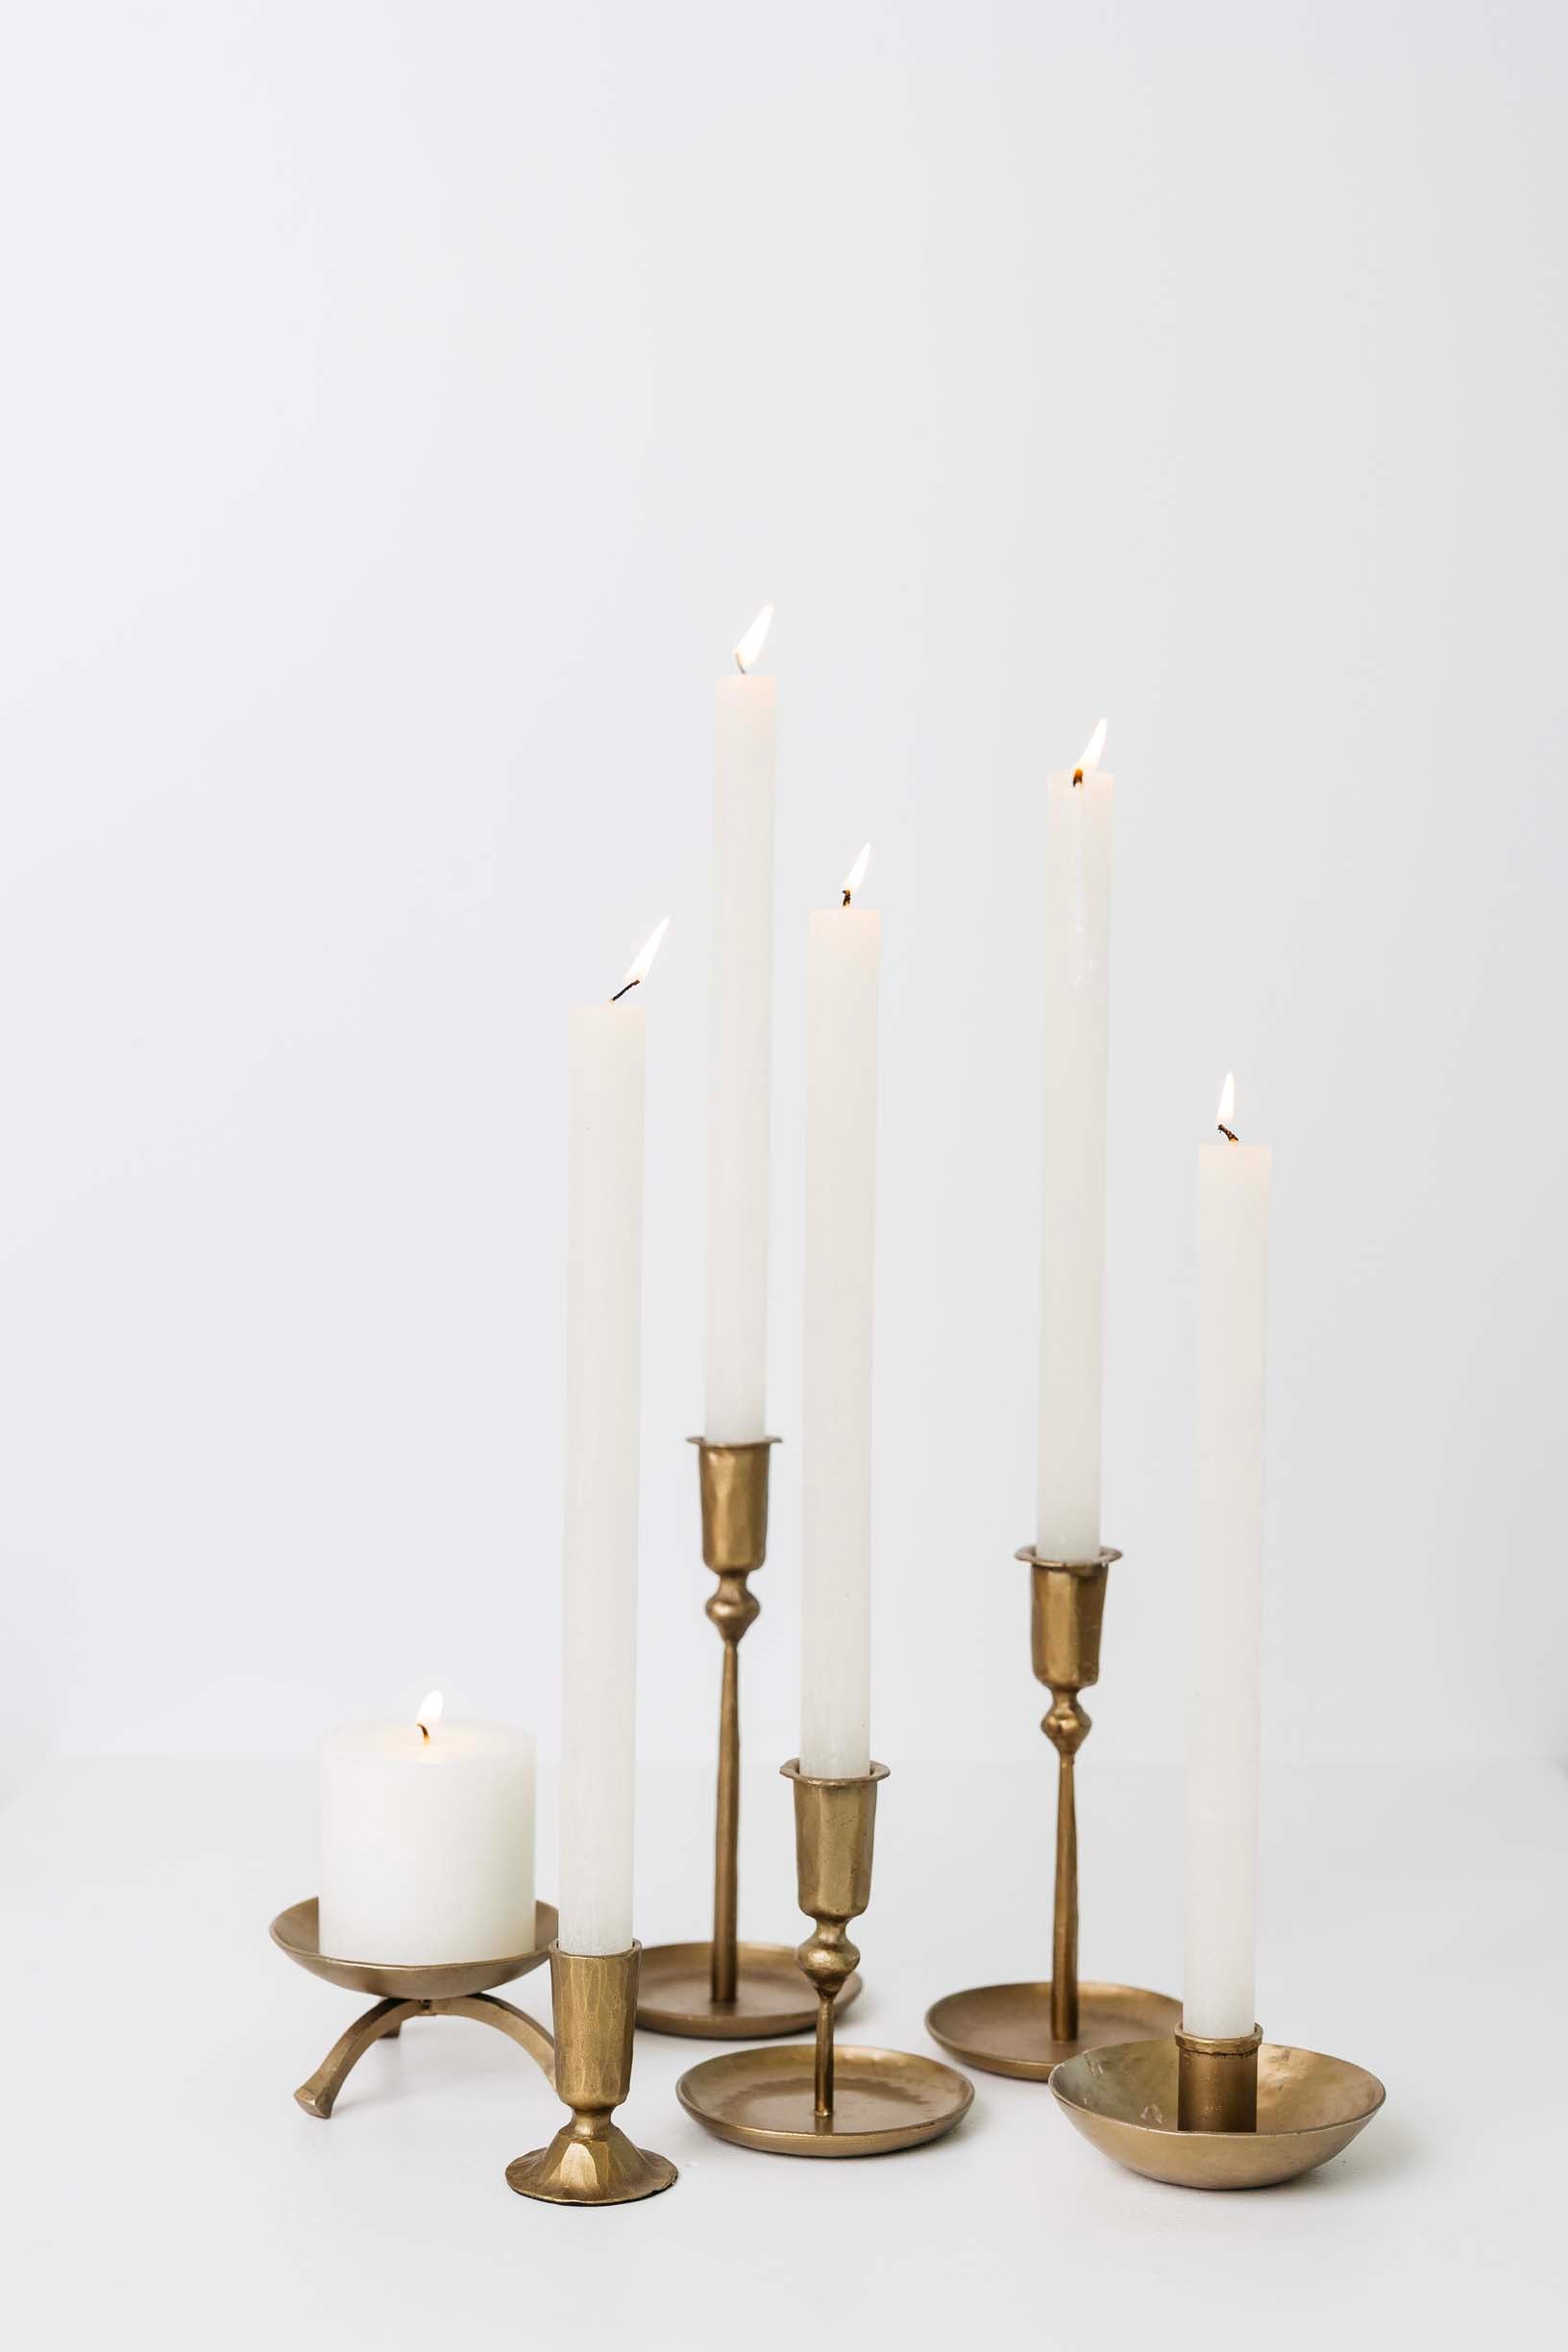 Cariso Brass Pillar Candle Holders - The Pretty Prop Shop